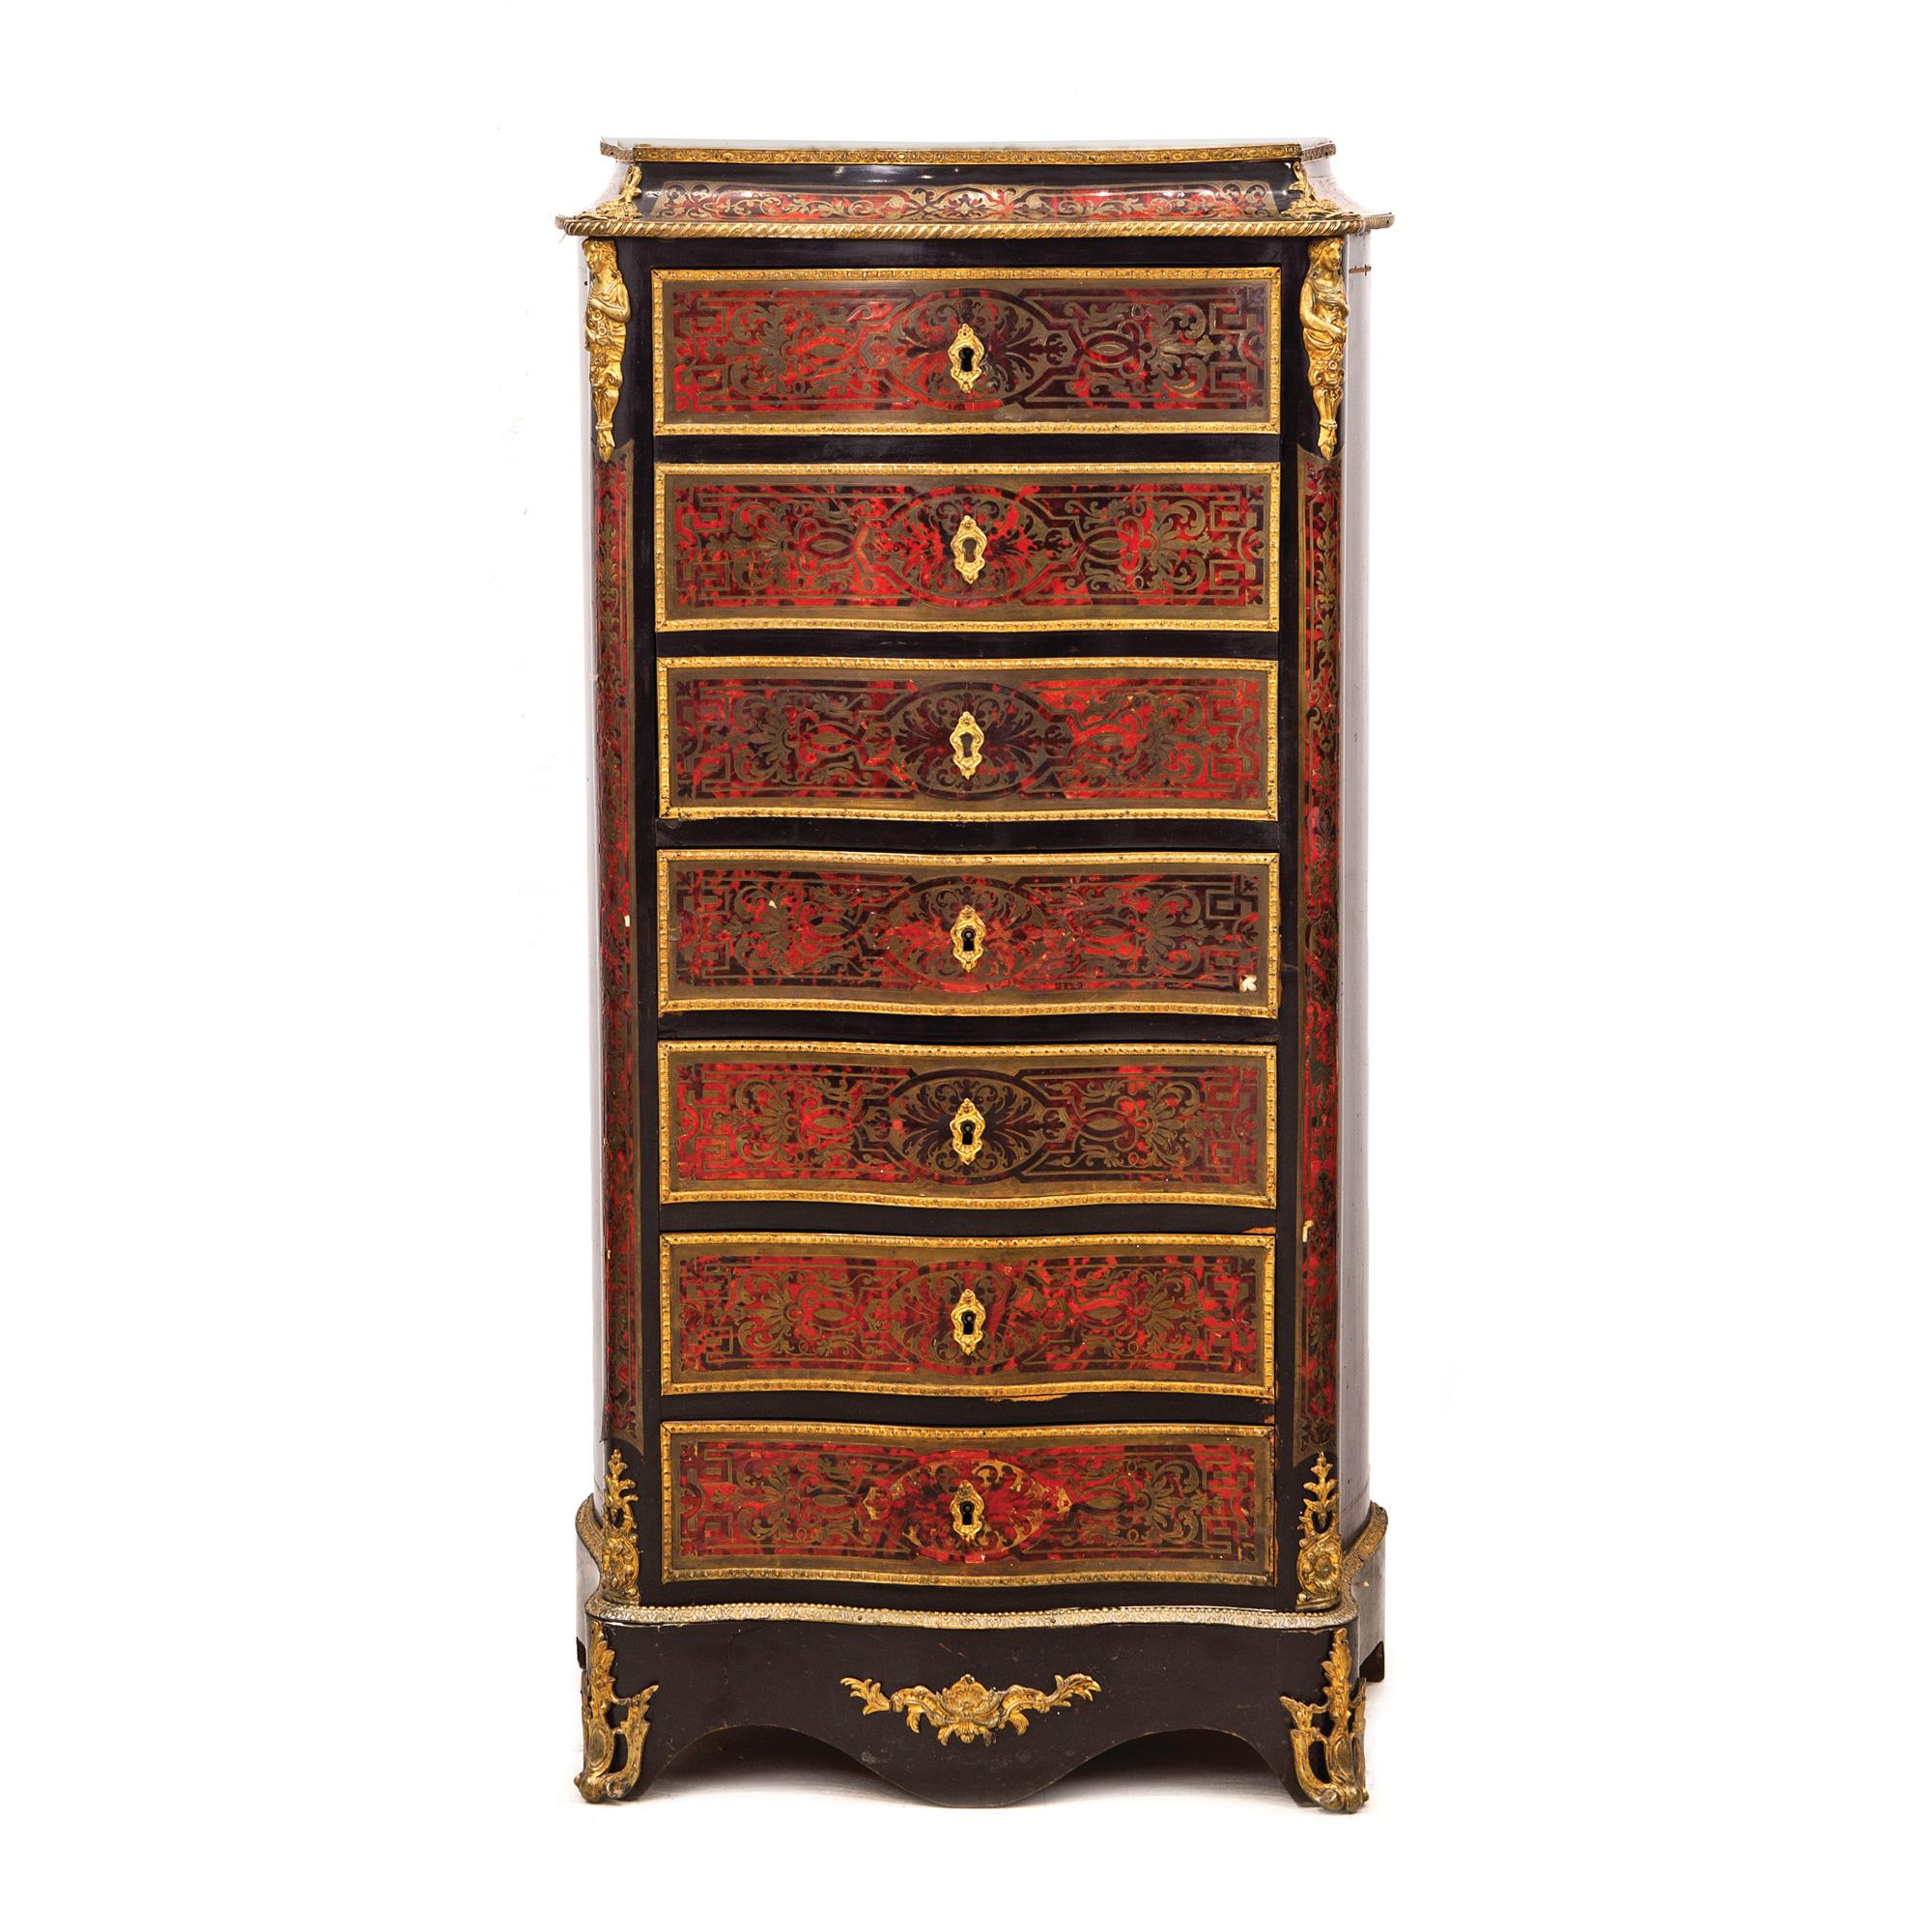 Secretaire À Abattant Napoleon III
In ebonized wood
19th century
Boulle type decoration in Carey and golden brass.
With bronze applications and marble cover. Some lack.
Measures: 118 x 37 x 62 cm.